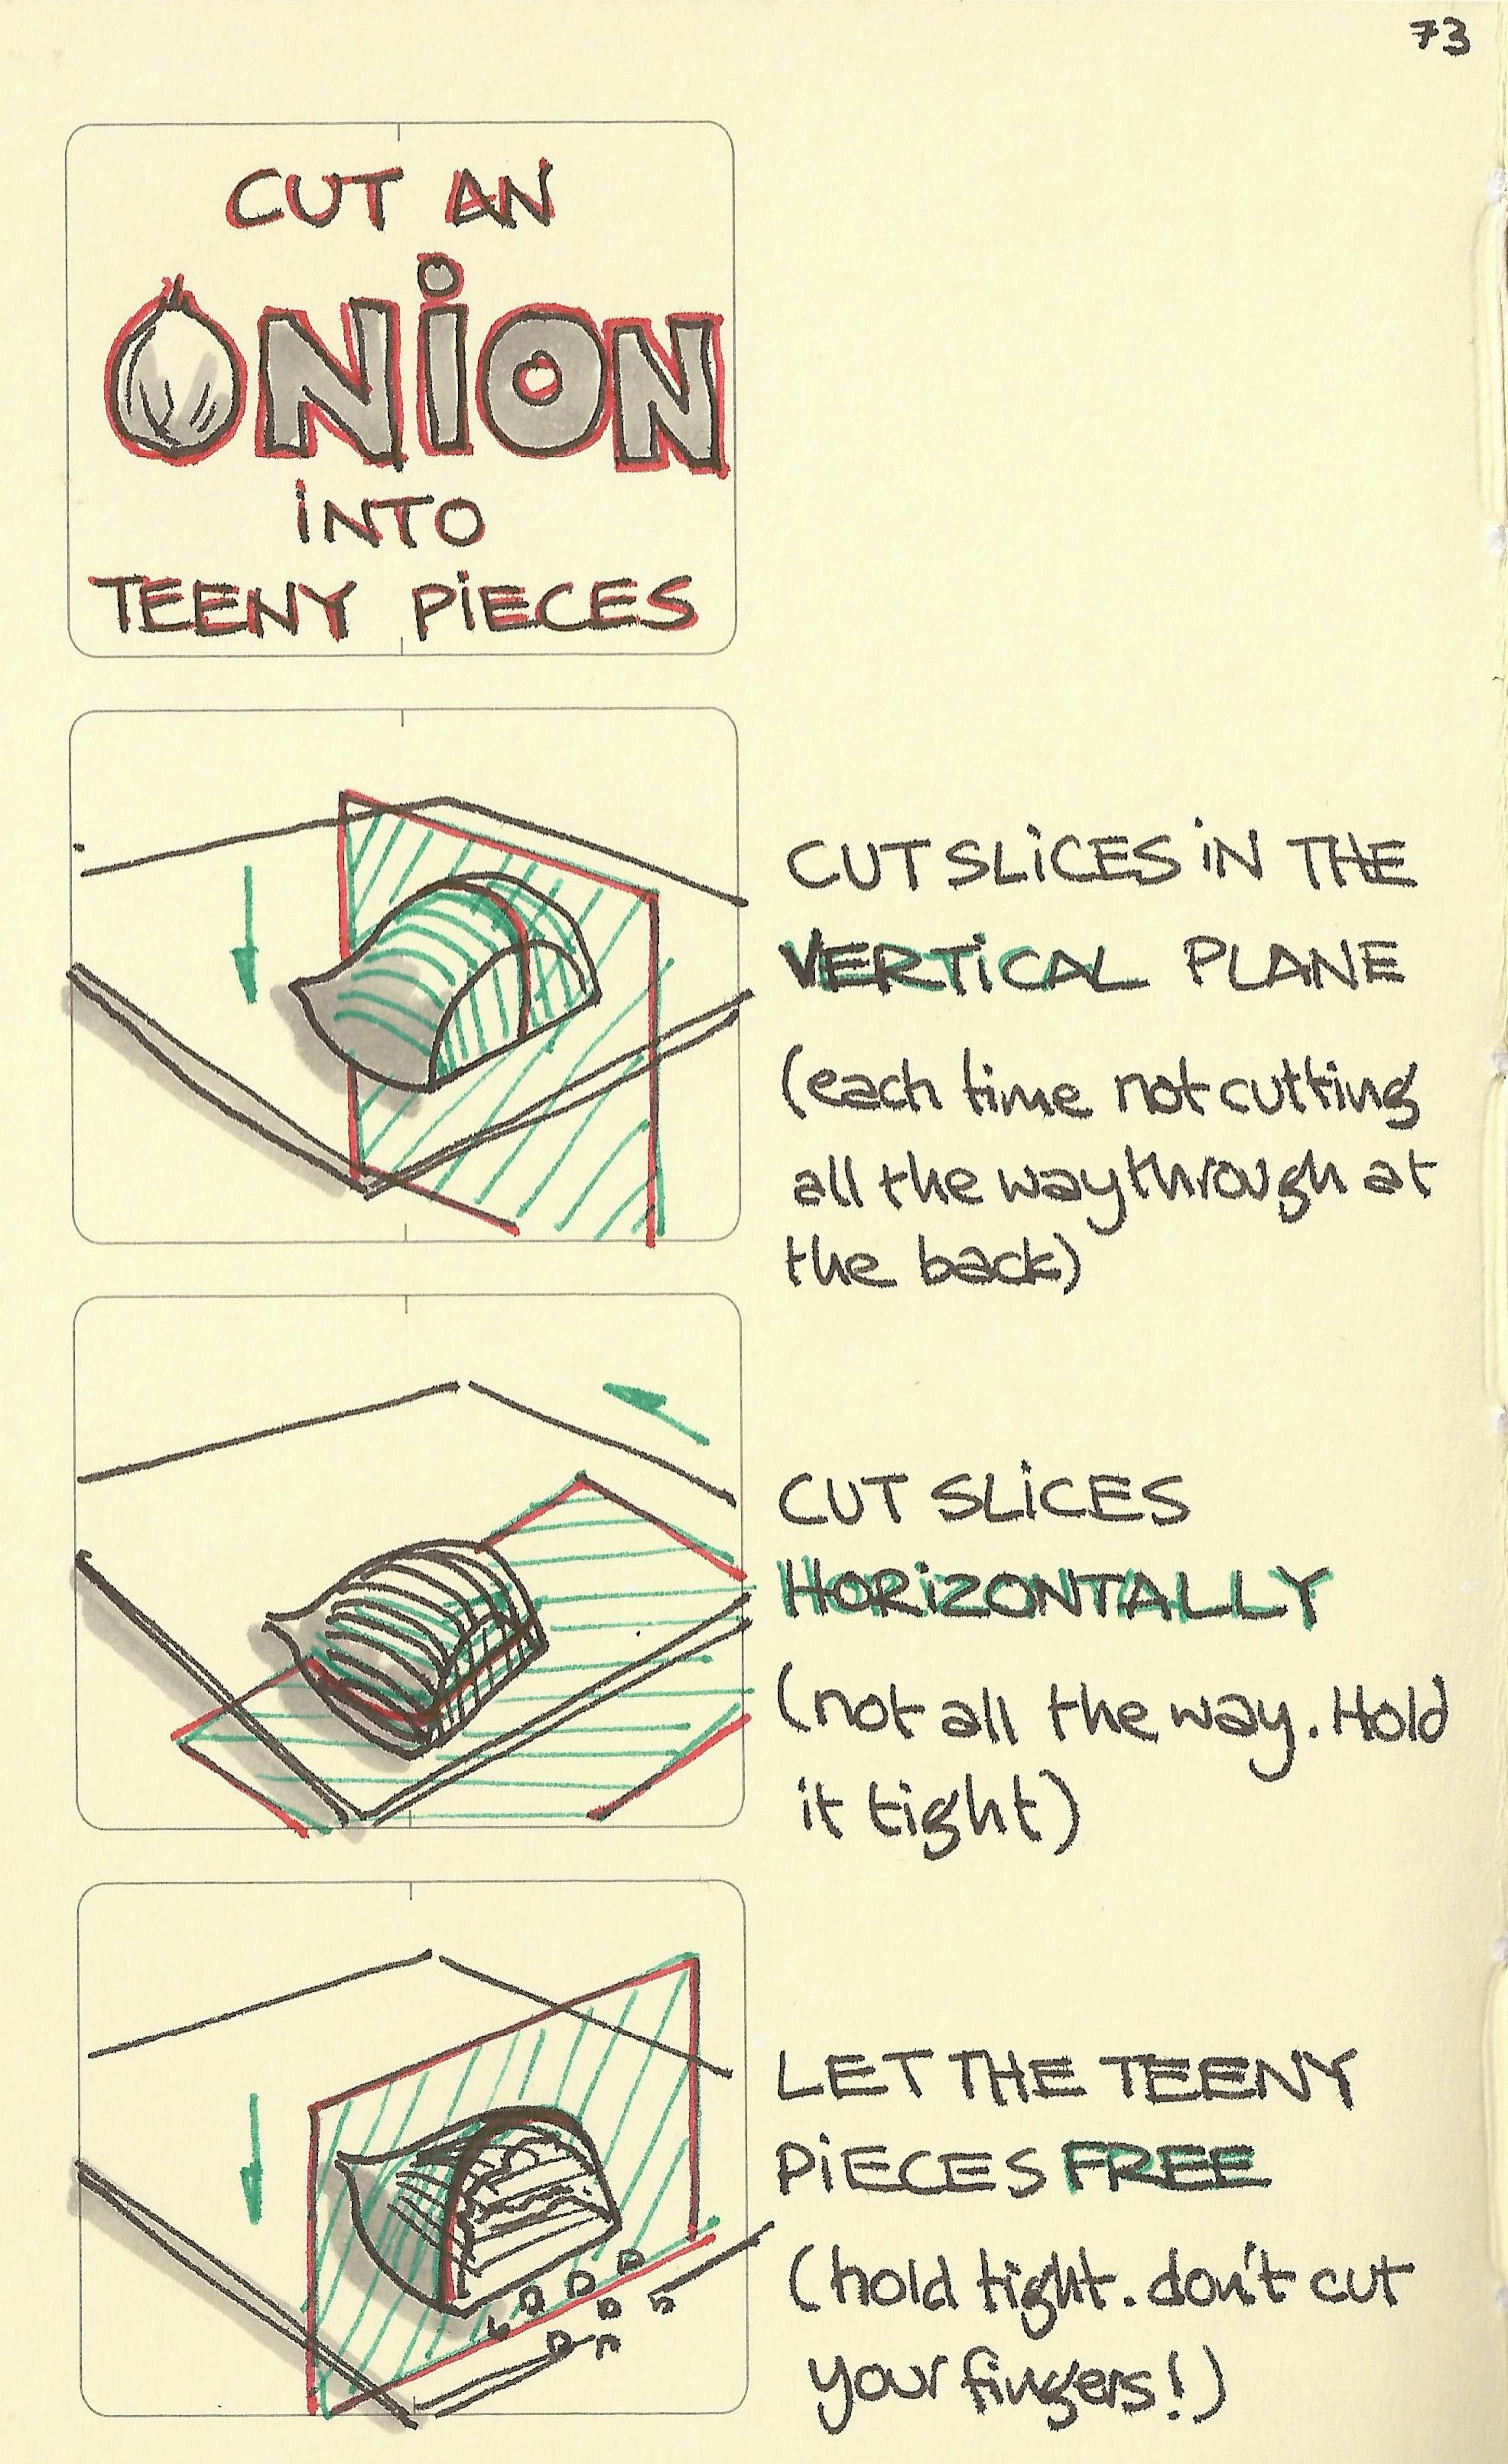 Cut an onion into teeny pieces - Sketchplanations